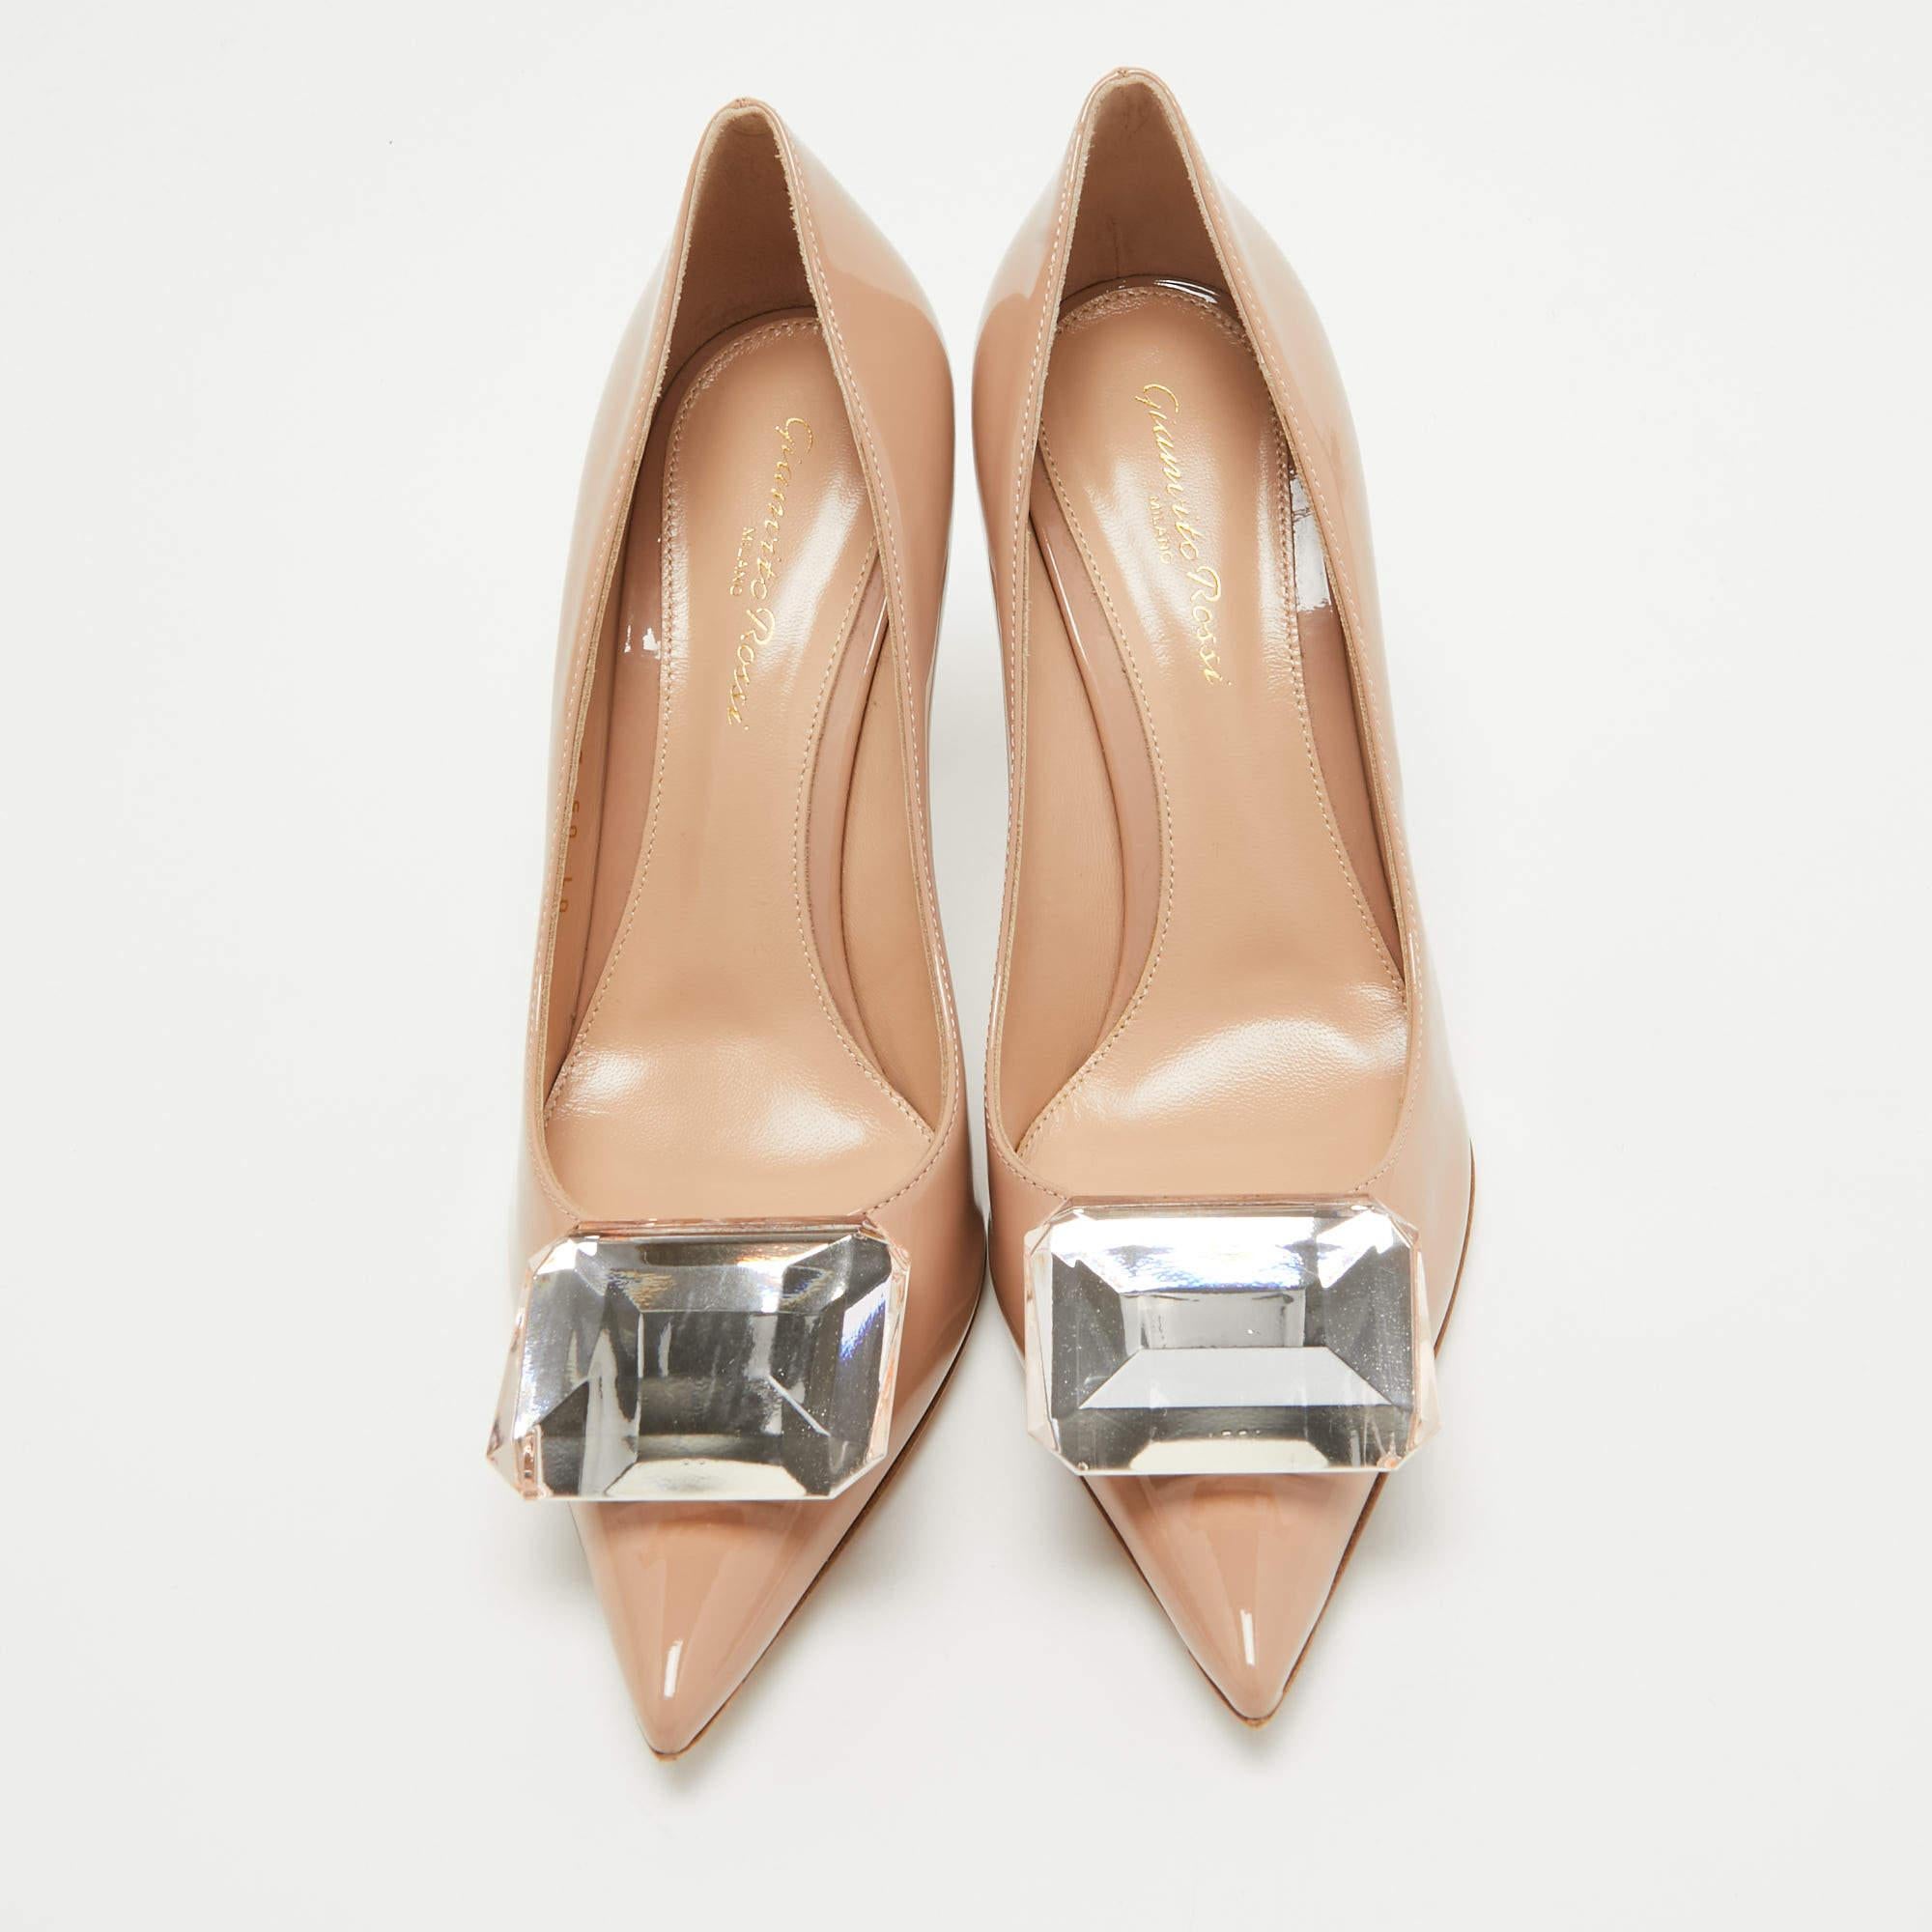 Indulge in elegance with Gianvito Rossi's Jaipur pumps. Crafted with exquisite precision, these pumps boast a lustrous patent leather finish in a captivating shade of pink. Their sleek silhouette and pointed toe design effortlessly elevate any